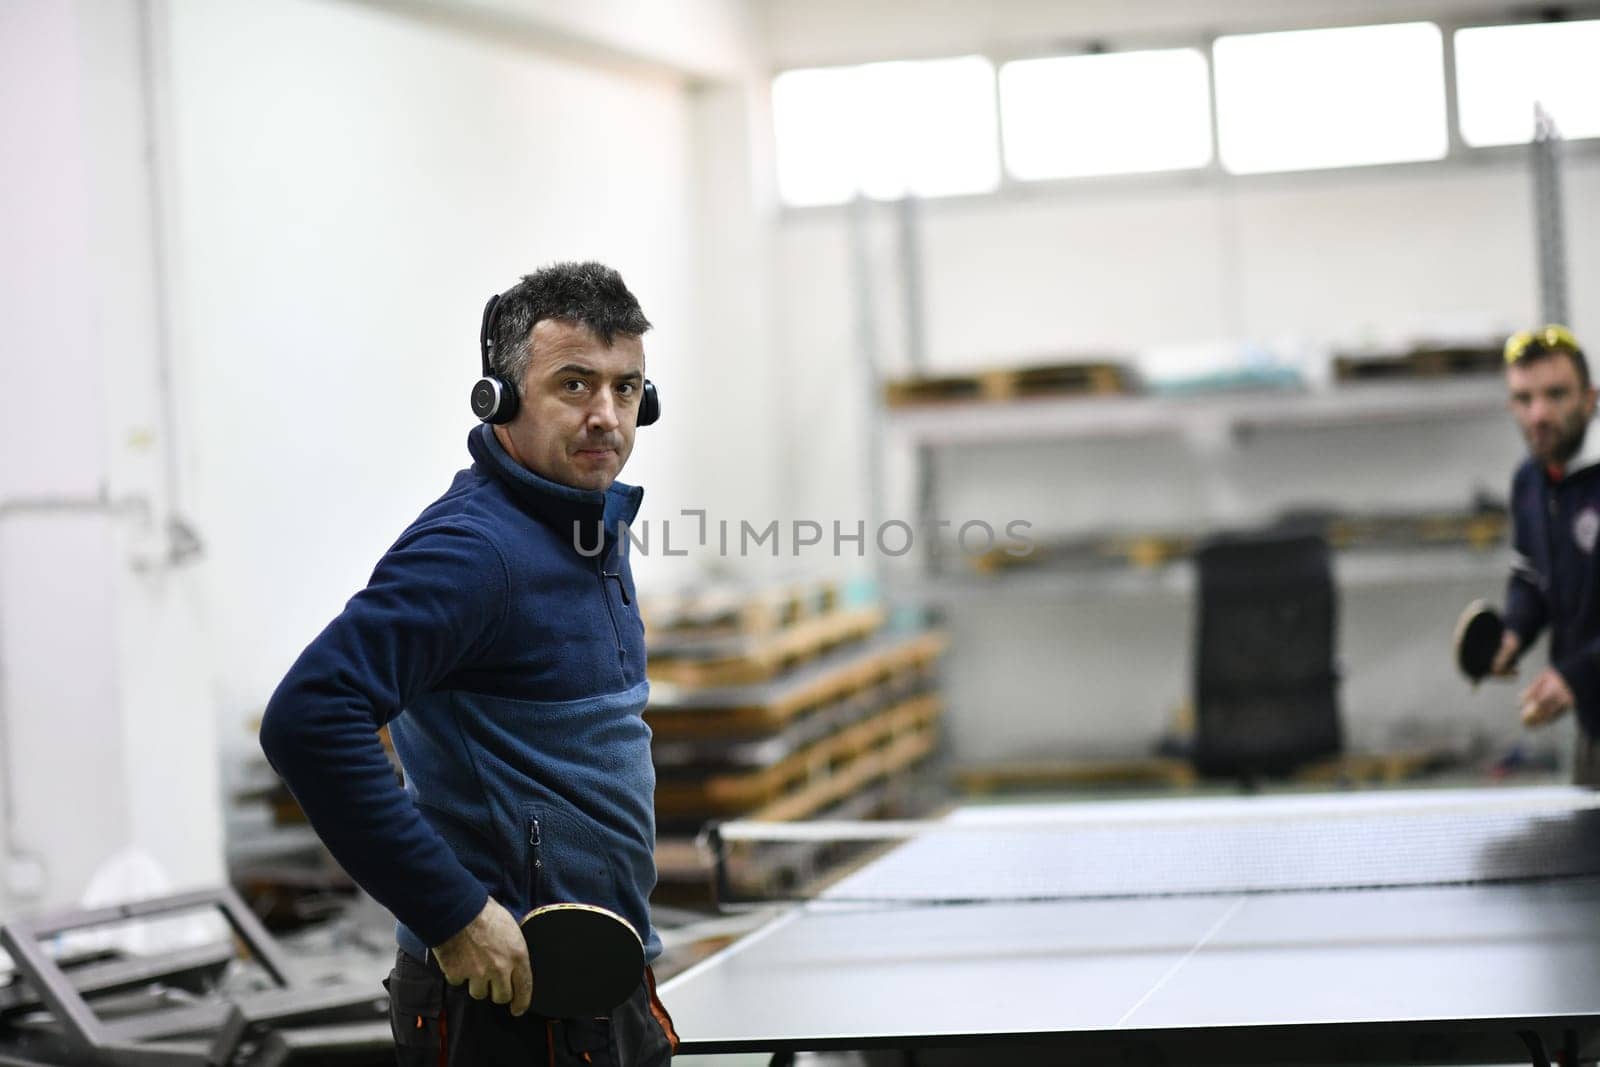 industry workers table tennis game and relaxing in their free time by dotshock